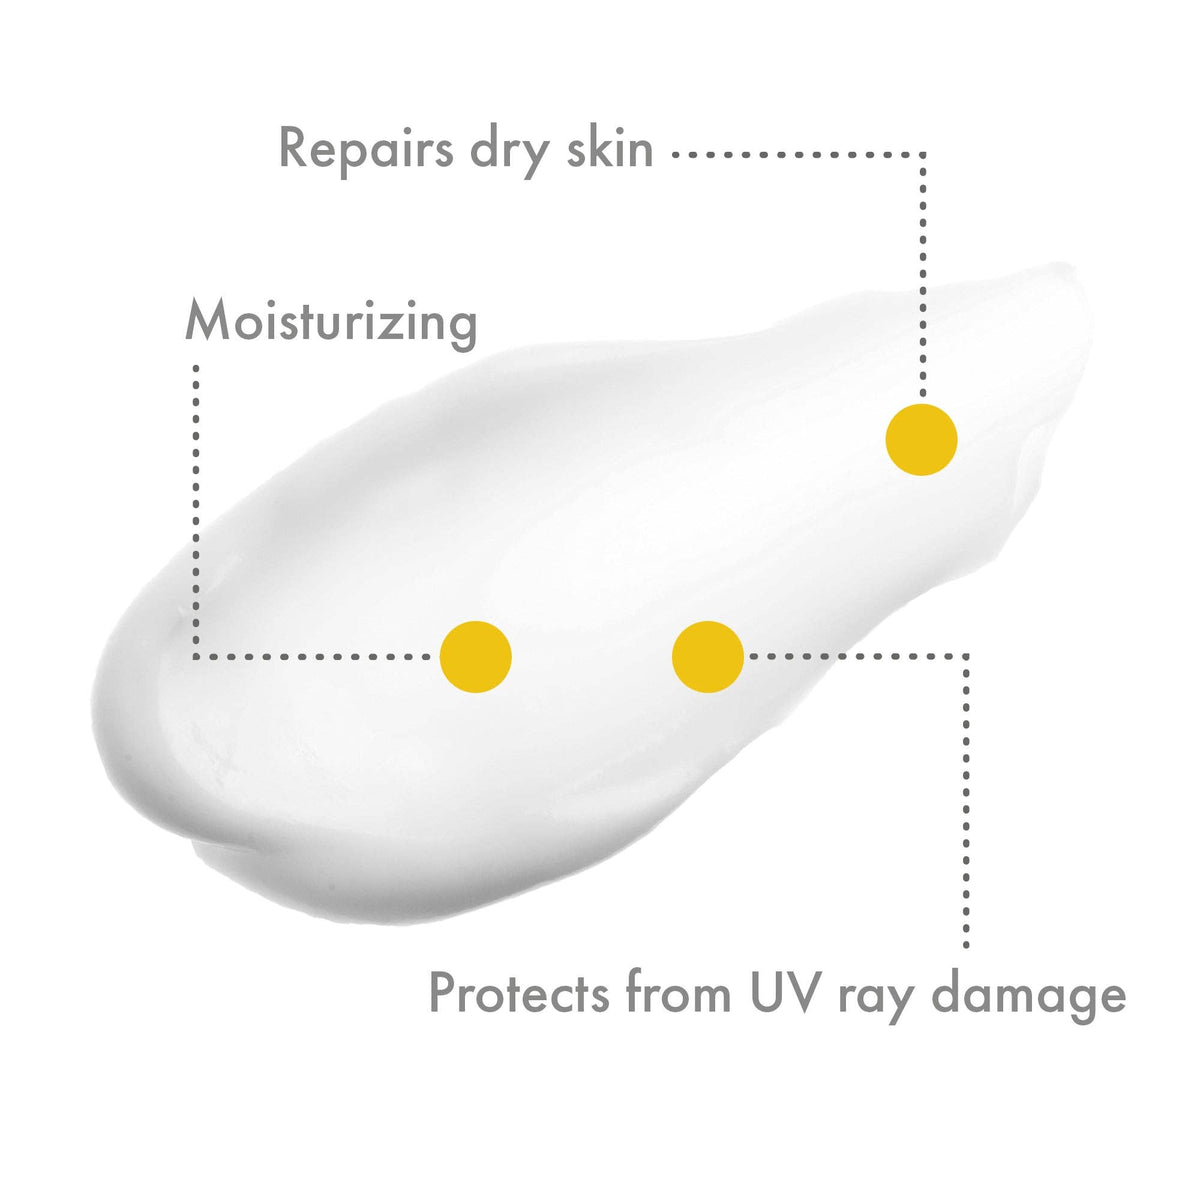 UnSun Cosmetics | EVERYDAY Face + Body Mineral SPF30 Lotion benefits